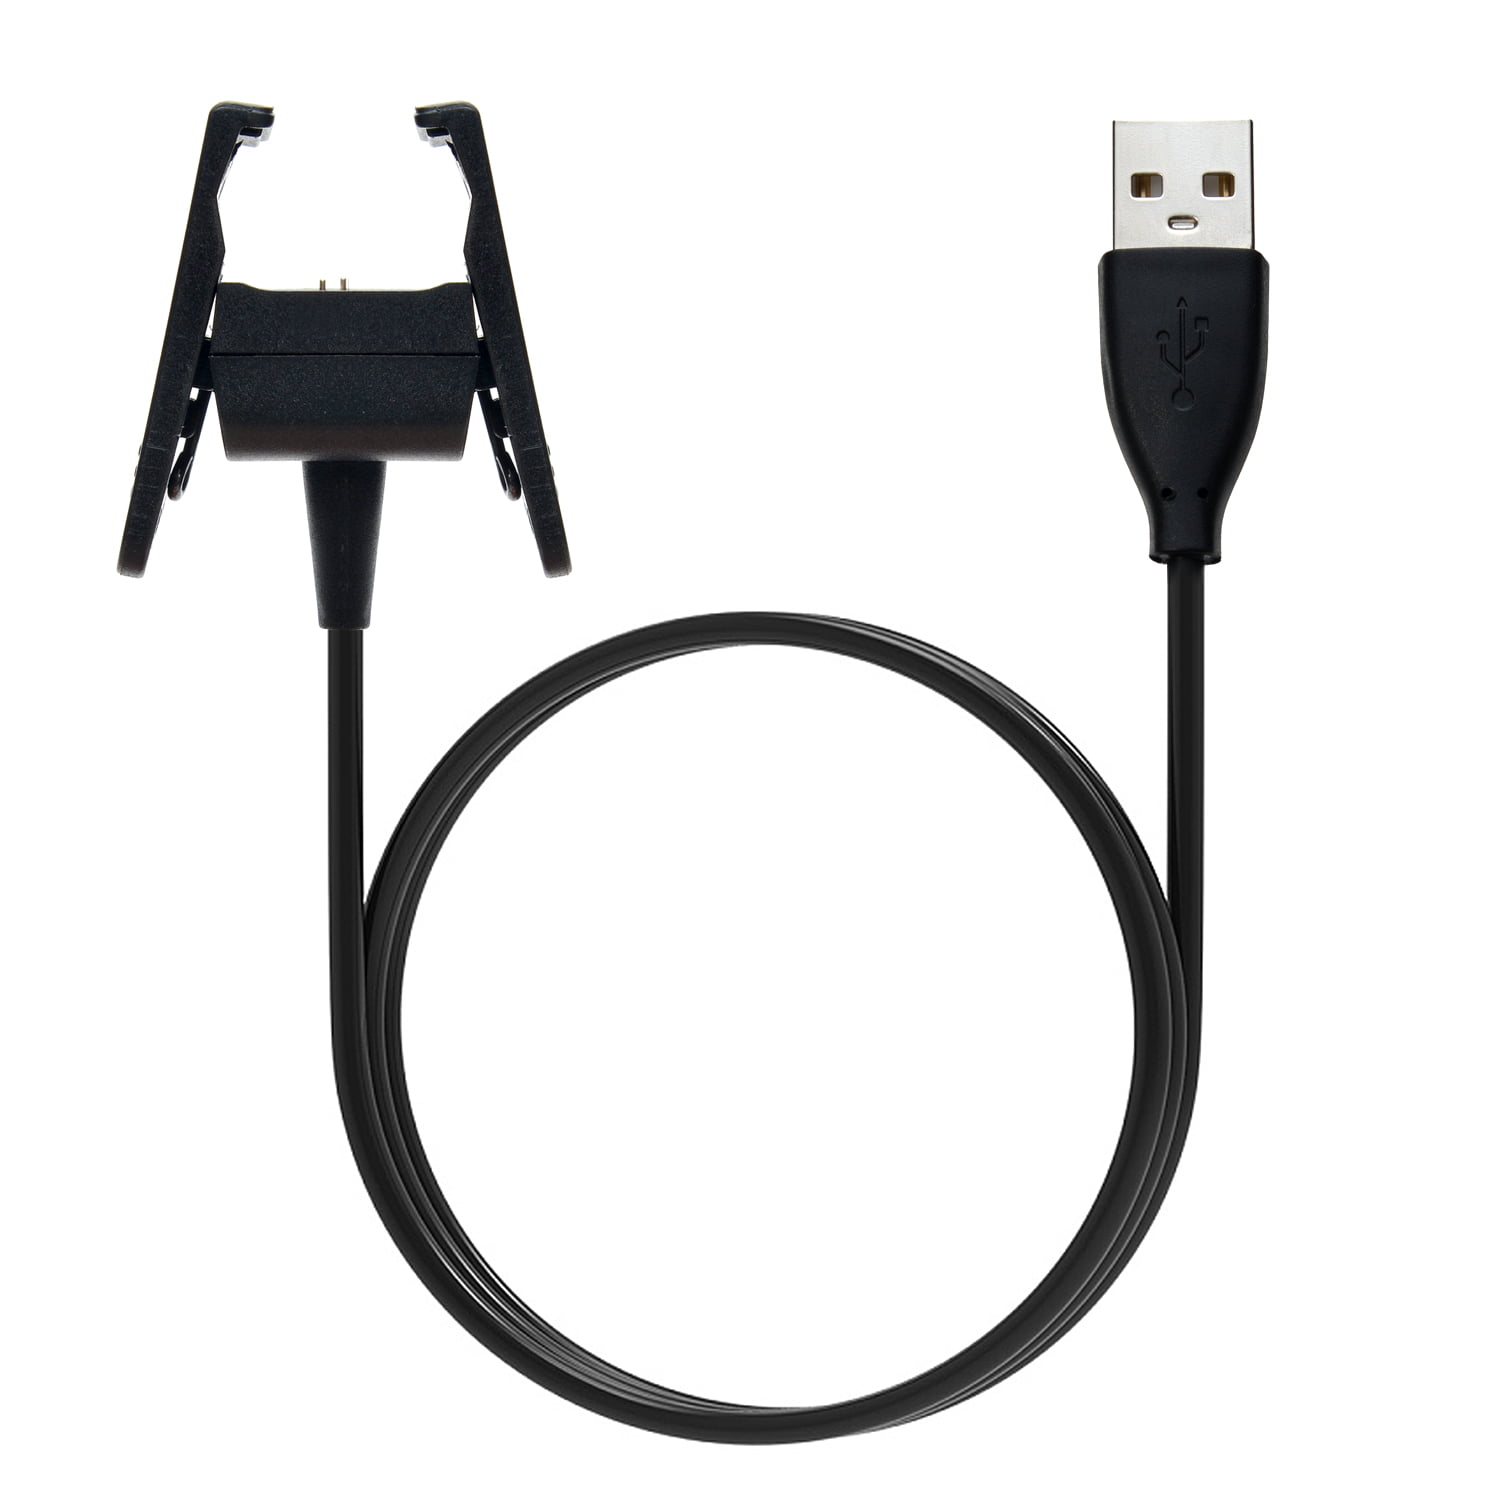 TECHGEAR Replacement USB Charger Cable for Fitbit Charge 2 for sale online 